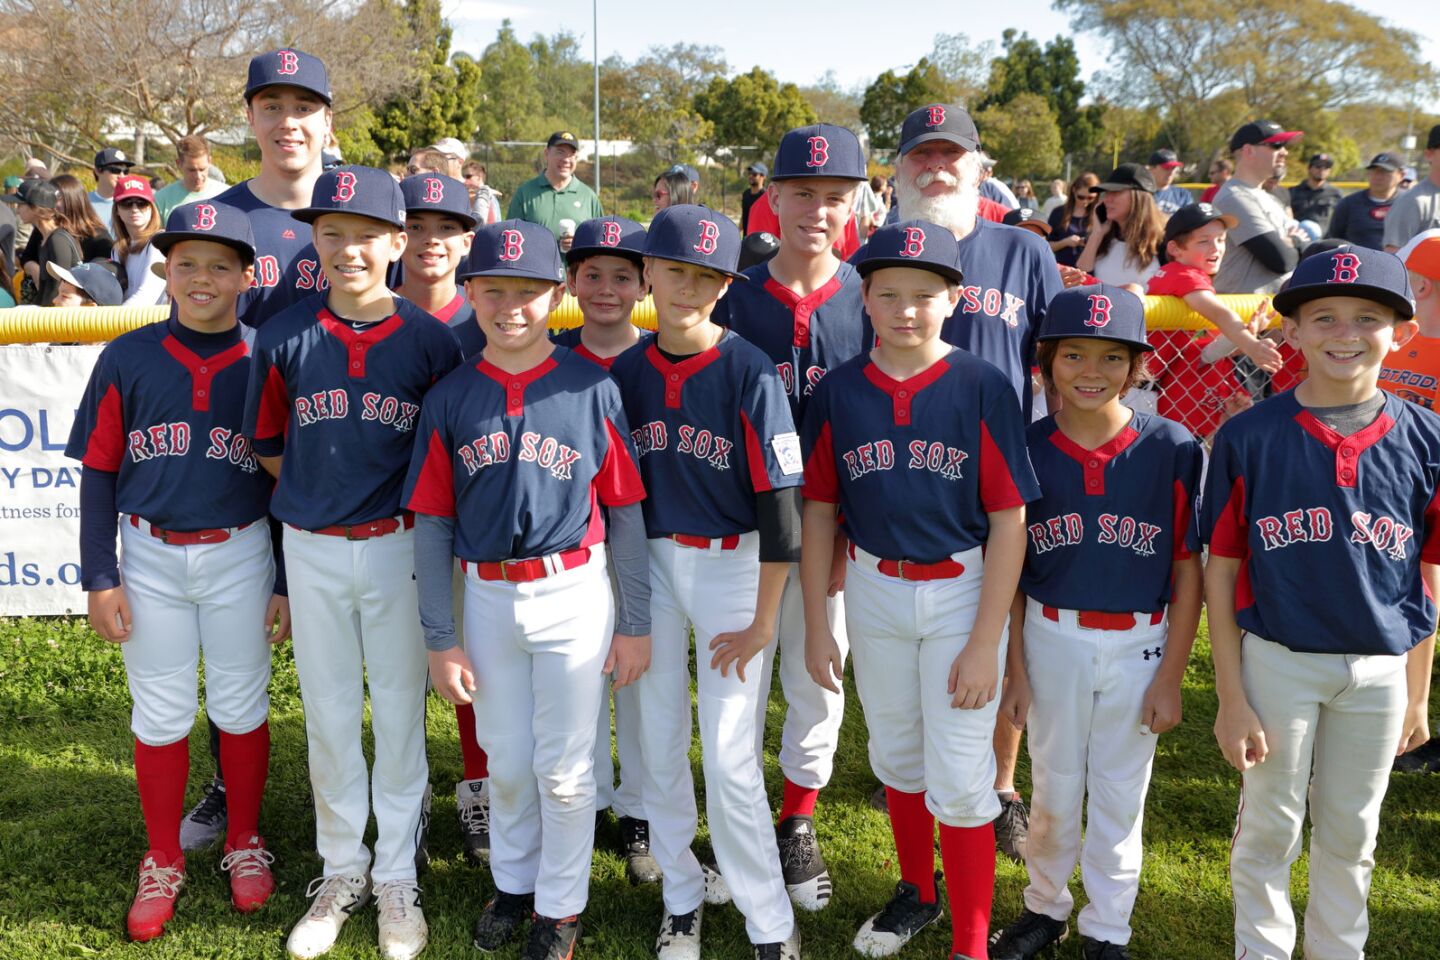 Red Sox at the Del Mar Little League Opening Day